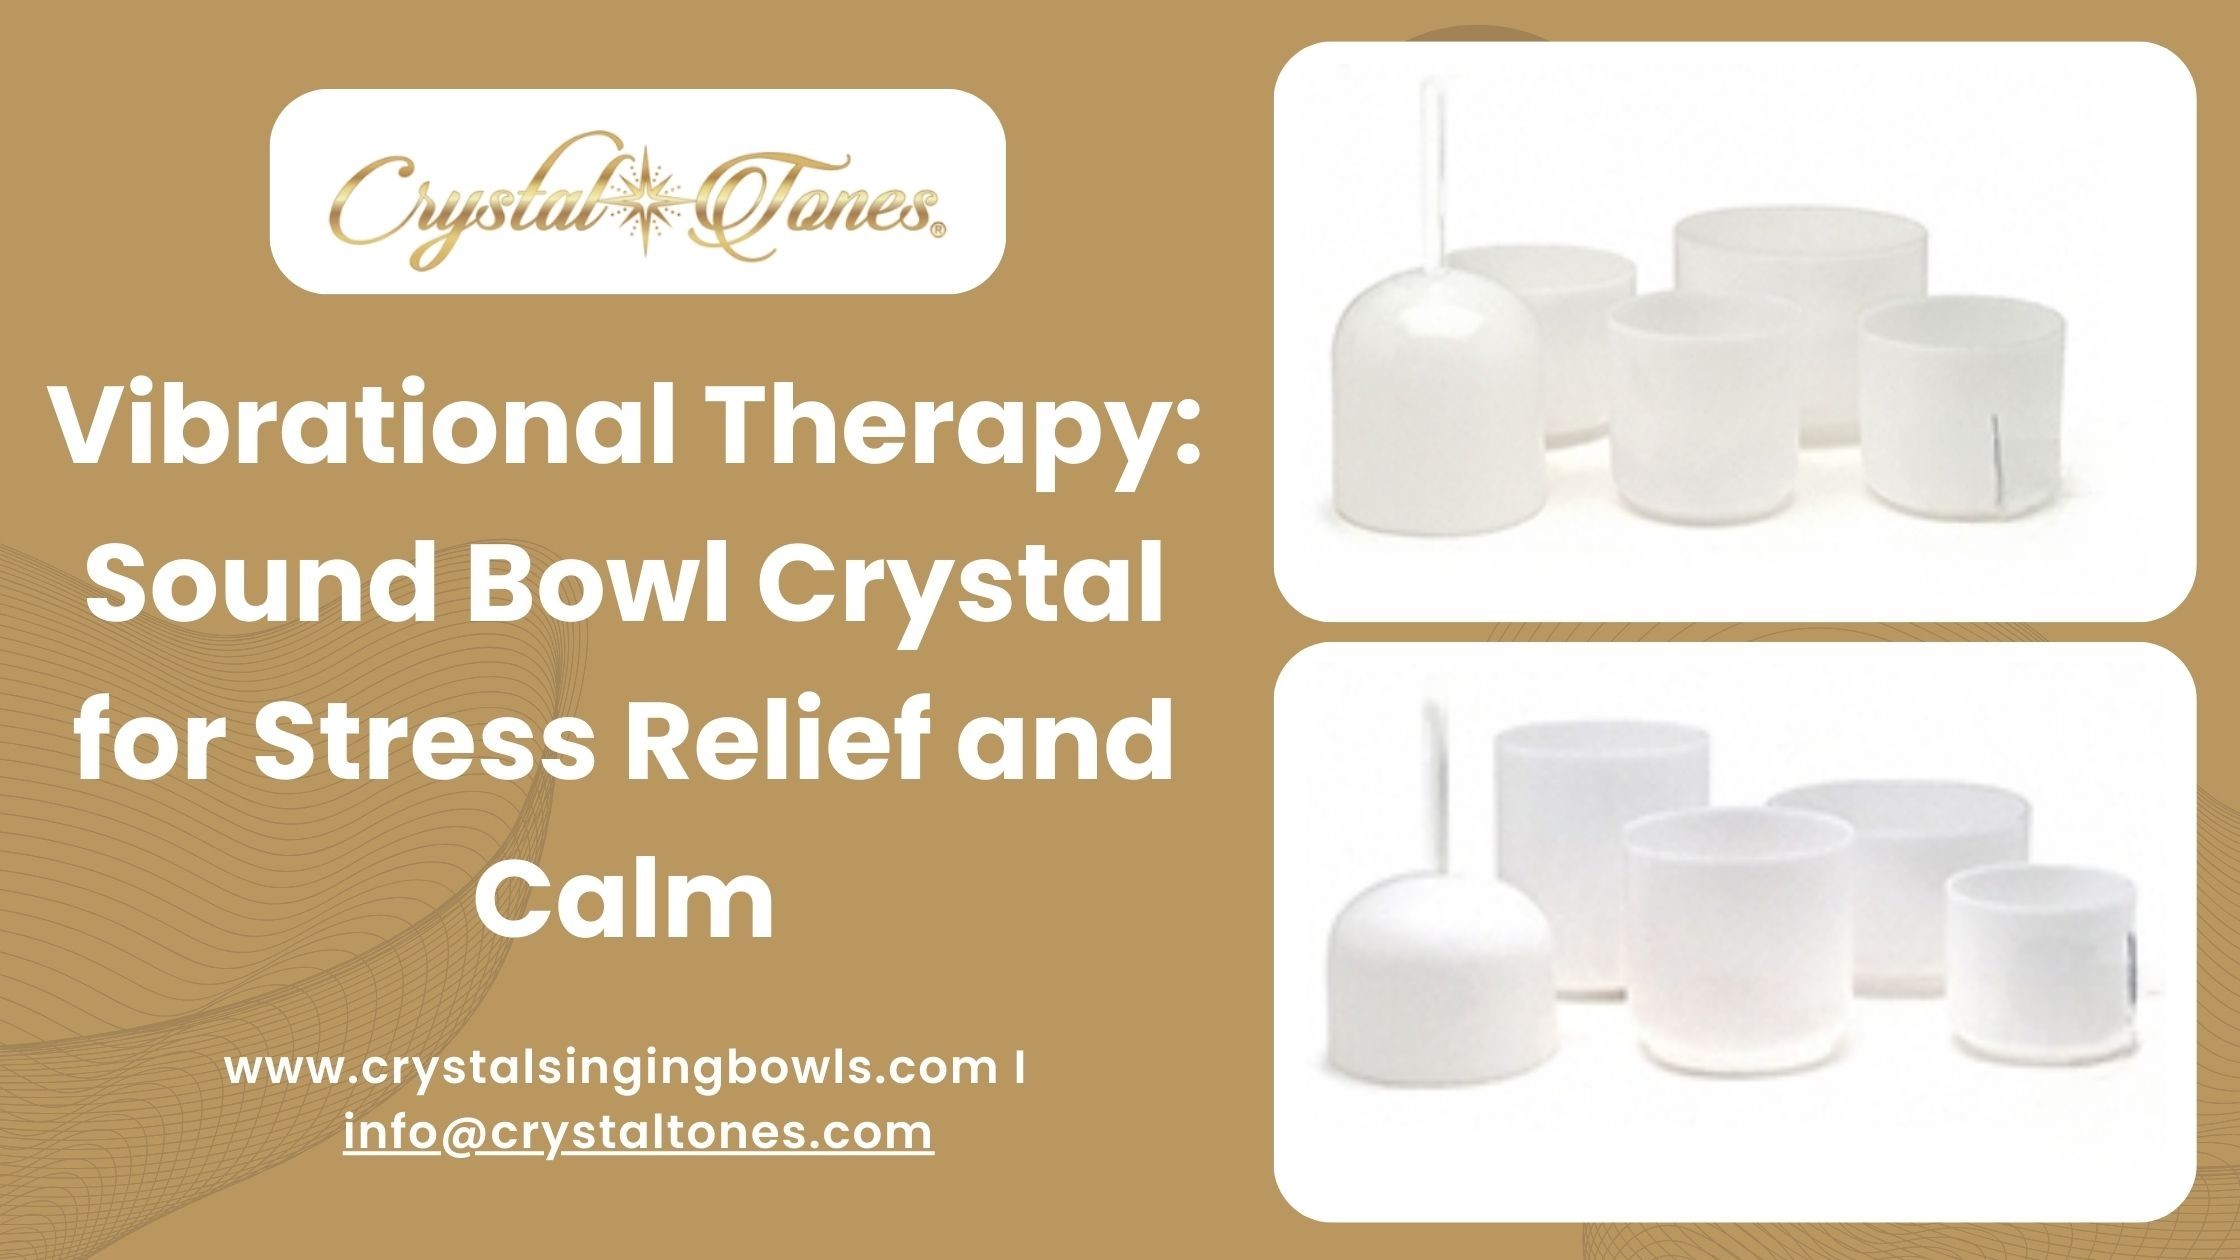 Vibrational Therapy: Sound Bowl Crystal for Stress Relief and Calm